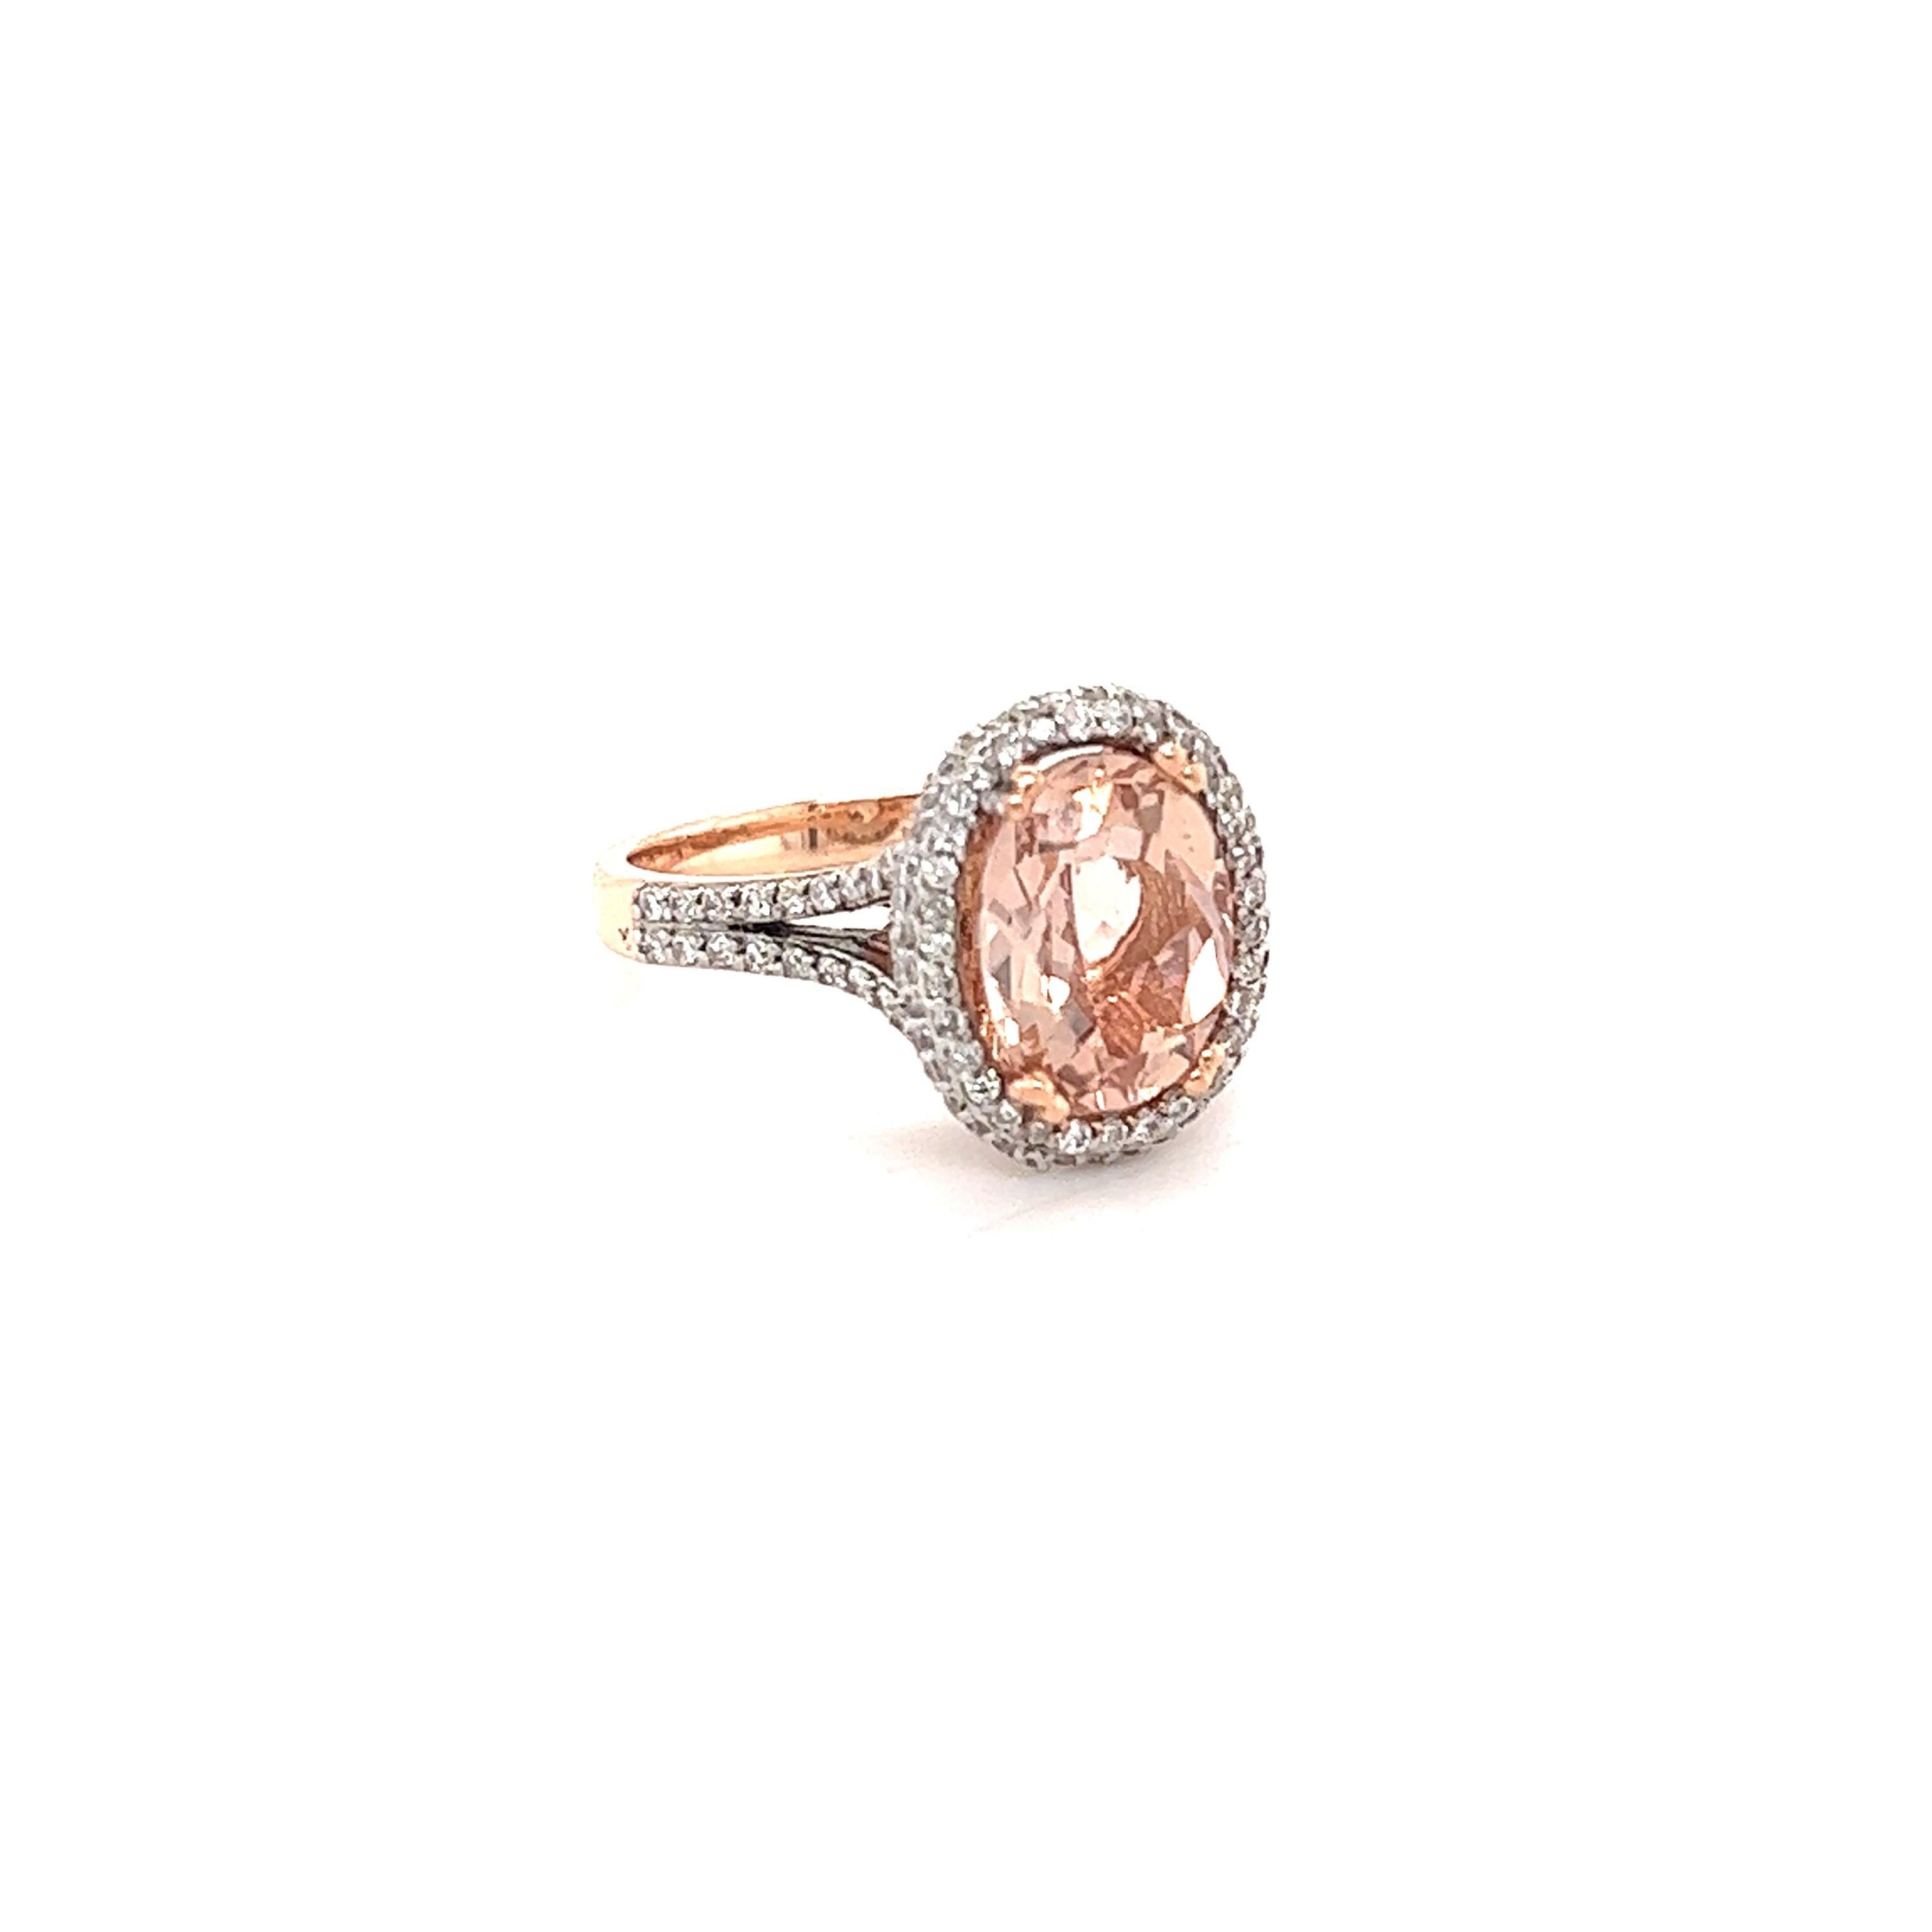 This Morganite ring has a beautiful 2.77 Carat Natural Oval Cut Morganite and measures at 11 mm x 8 mm. It is surrounded by 114 Round Cut Natural Diamonds that weigh 0.59 carats. The diamonds have a clarity and color of SI-F. The total carat weight